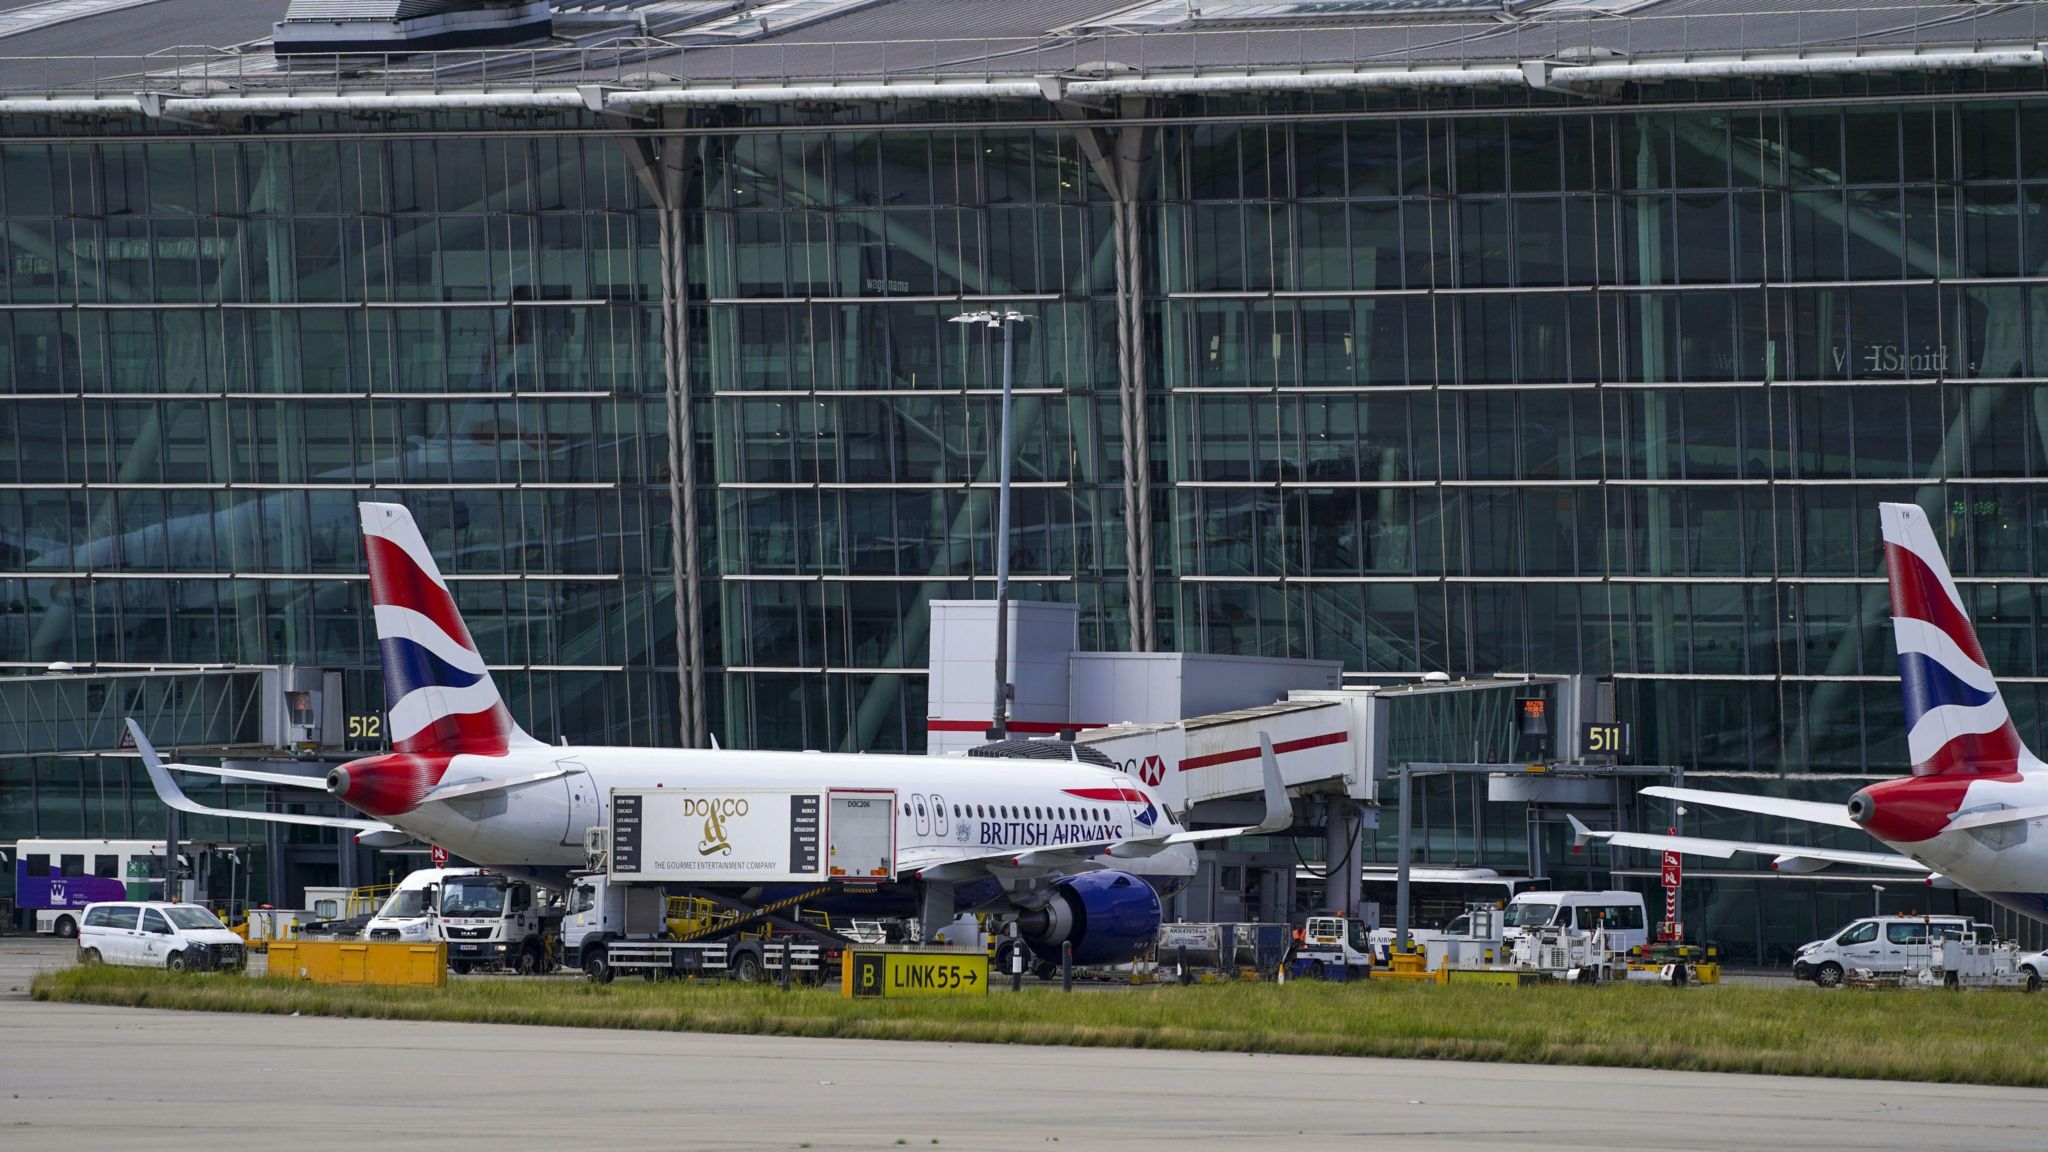 Heathrow Airport Terminal 5 showing a British Airways plane parked outside the terminal building